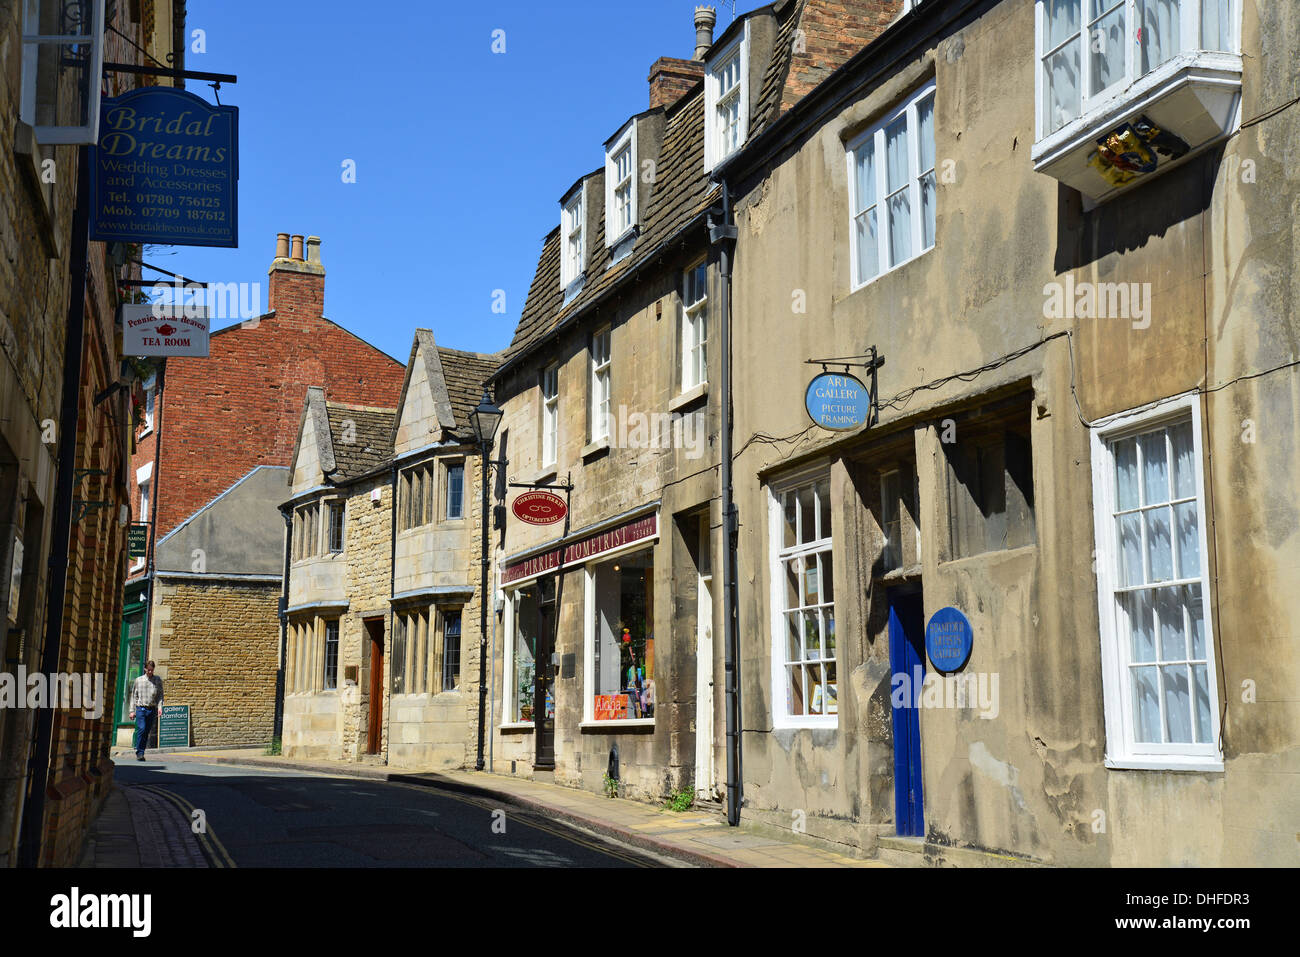 Maiden Lane, Stamford, Lincolnshire, Angleterre, Royaume-Uni Banque D'Images